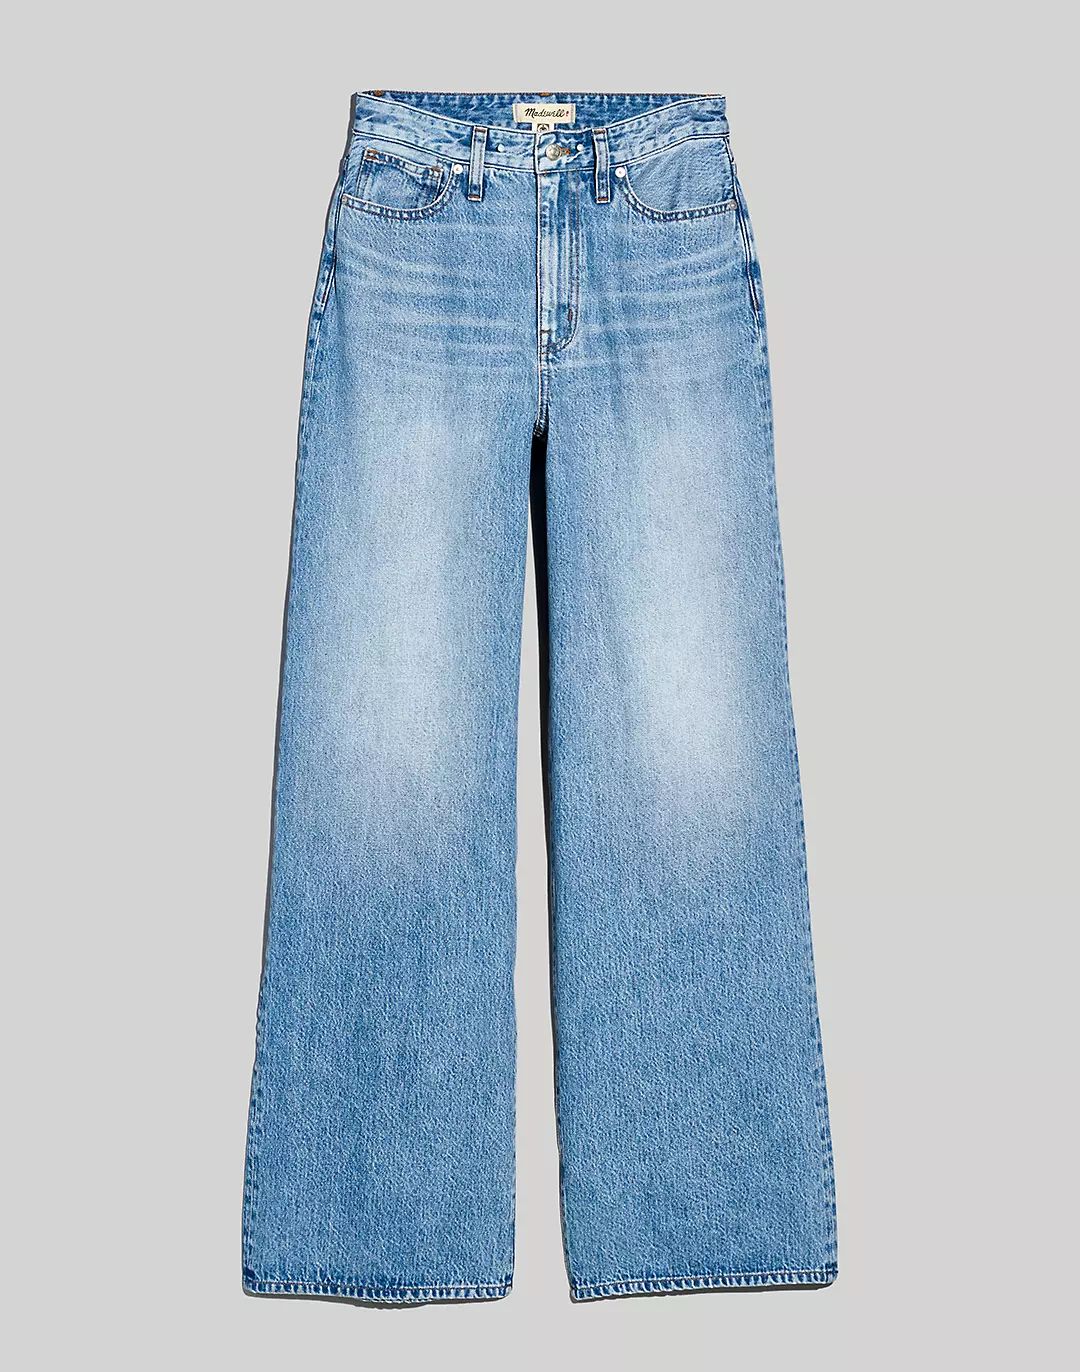 Curvy Superwide-Leg Jeans in Varian Wash | Madewell